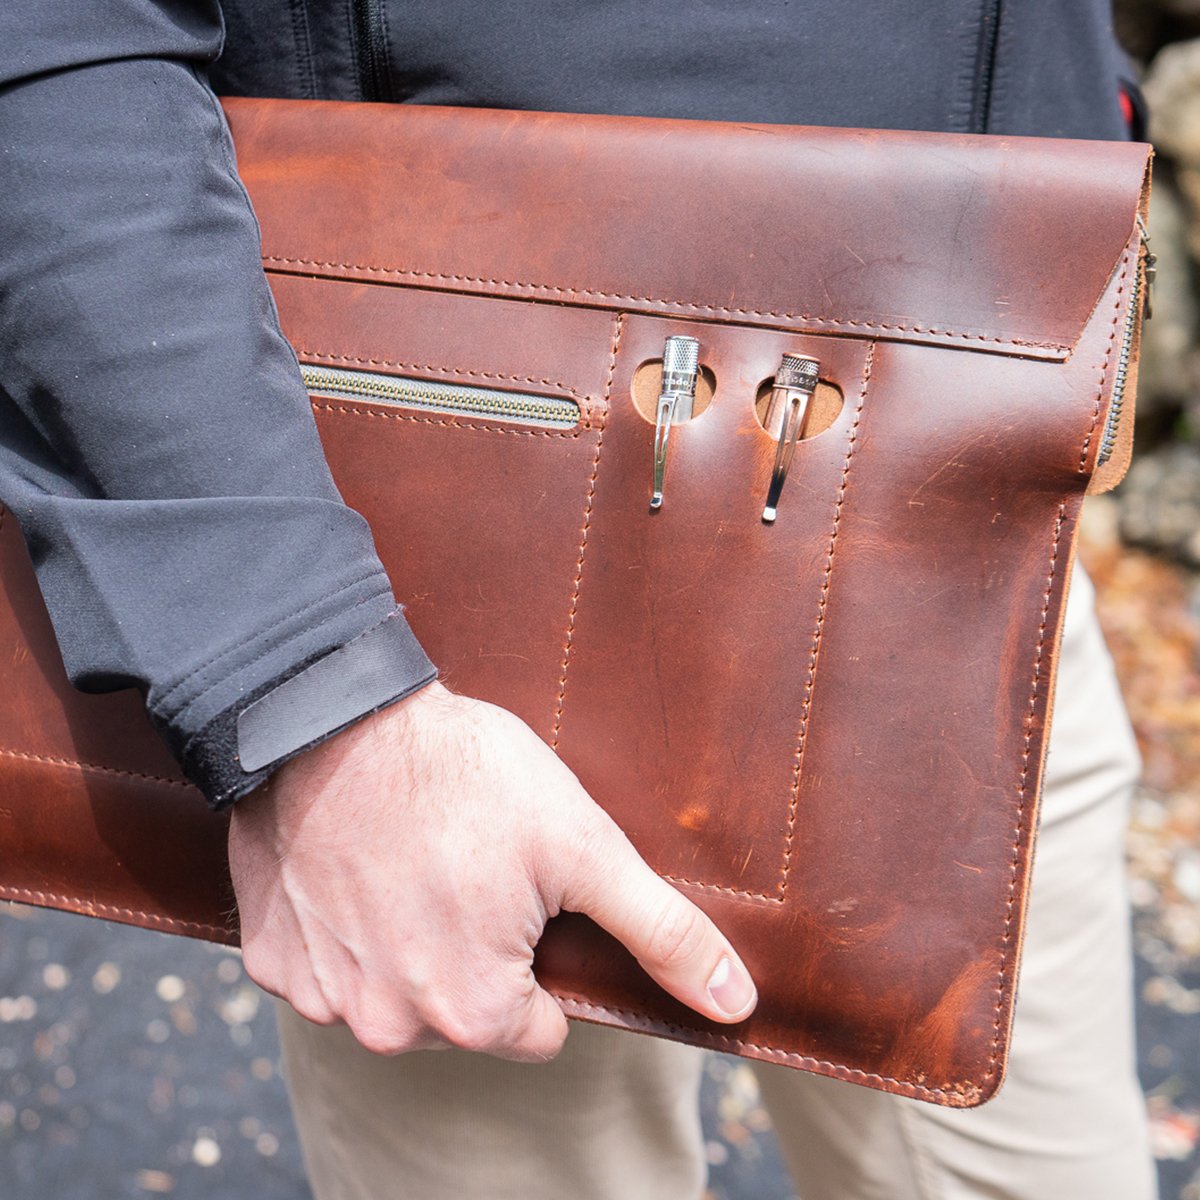 The best messenger bags, cases and sleeves for the new MacBook Pro